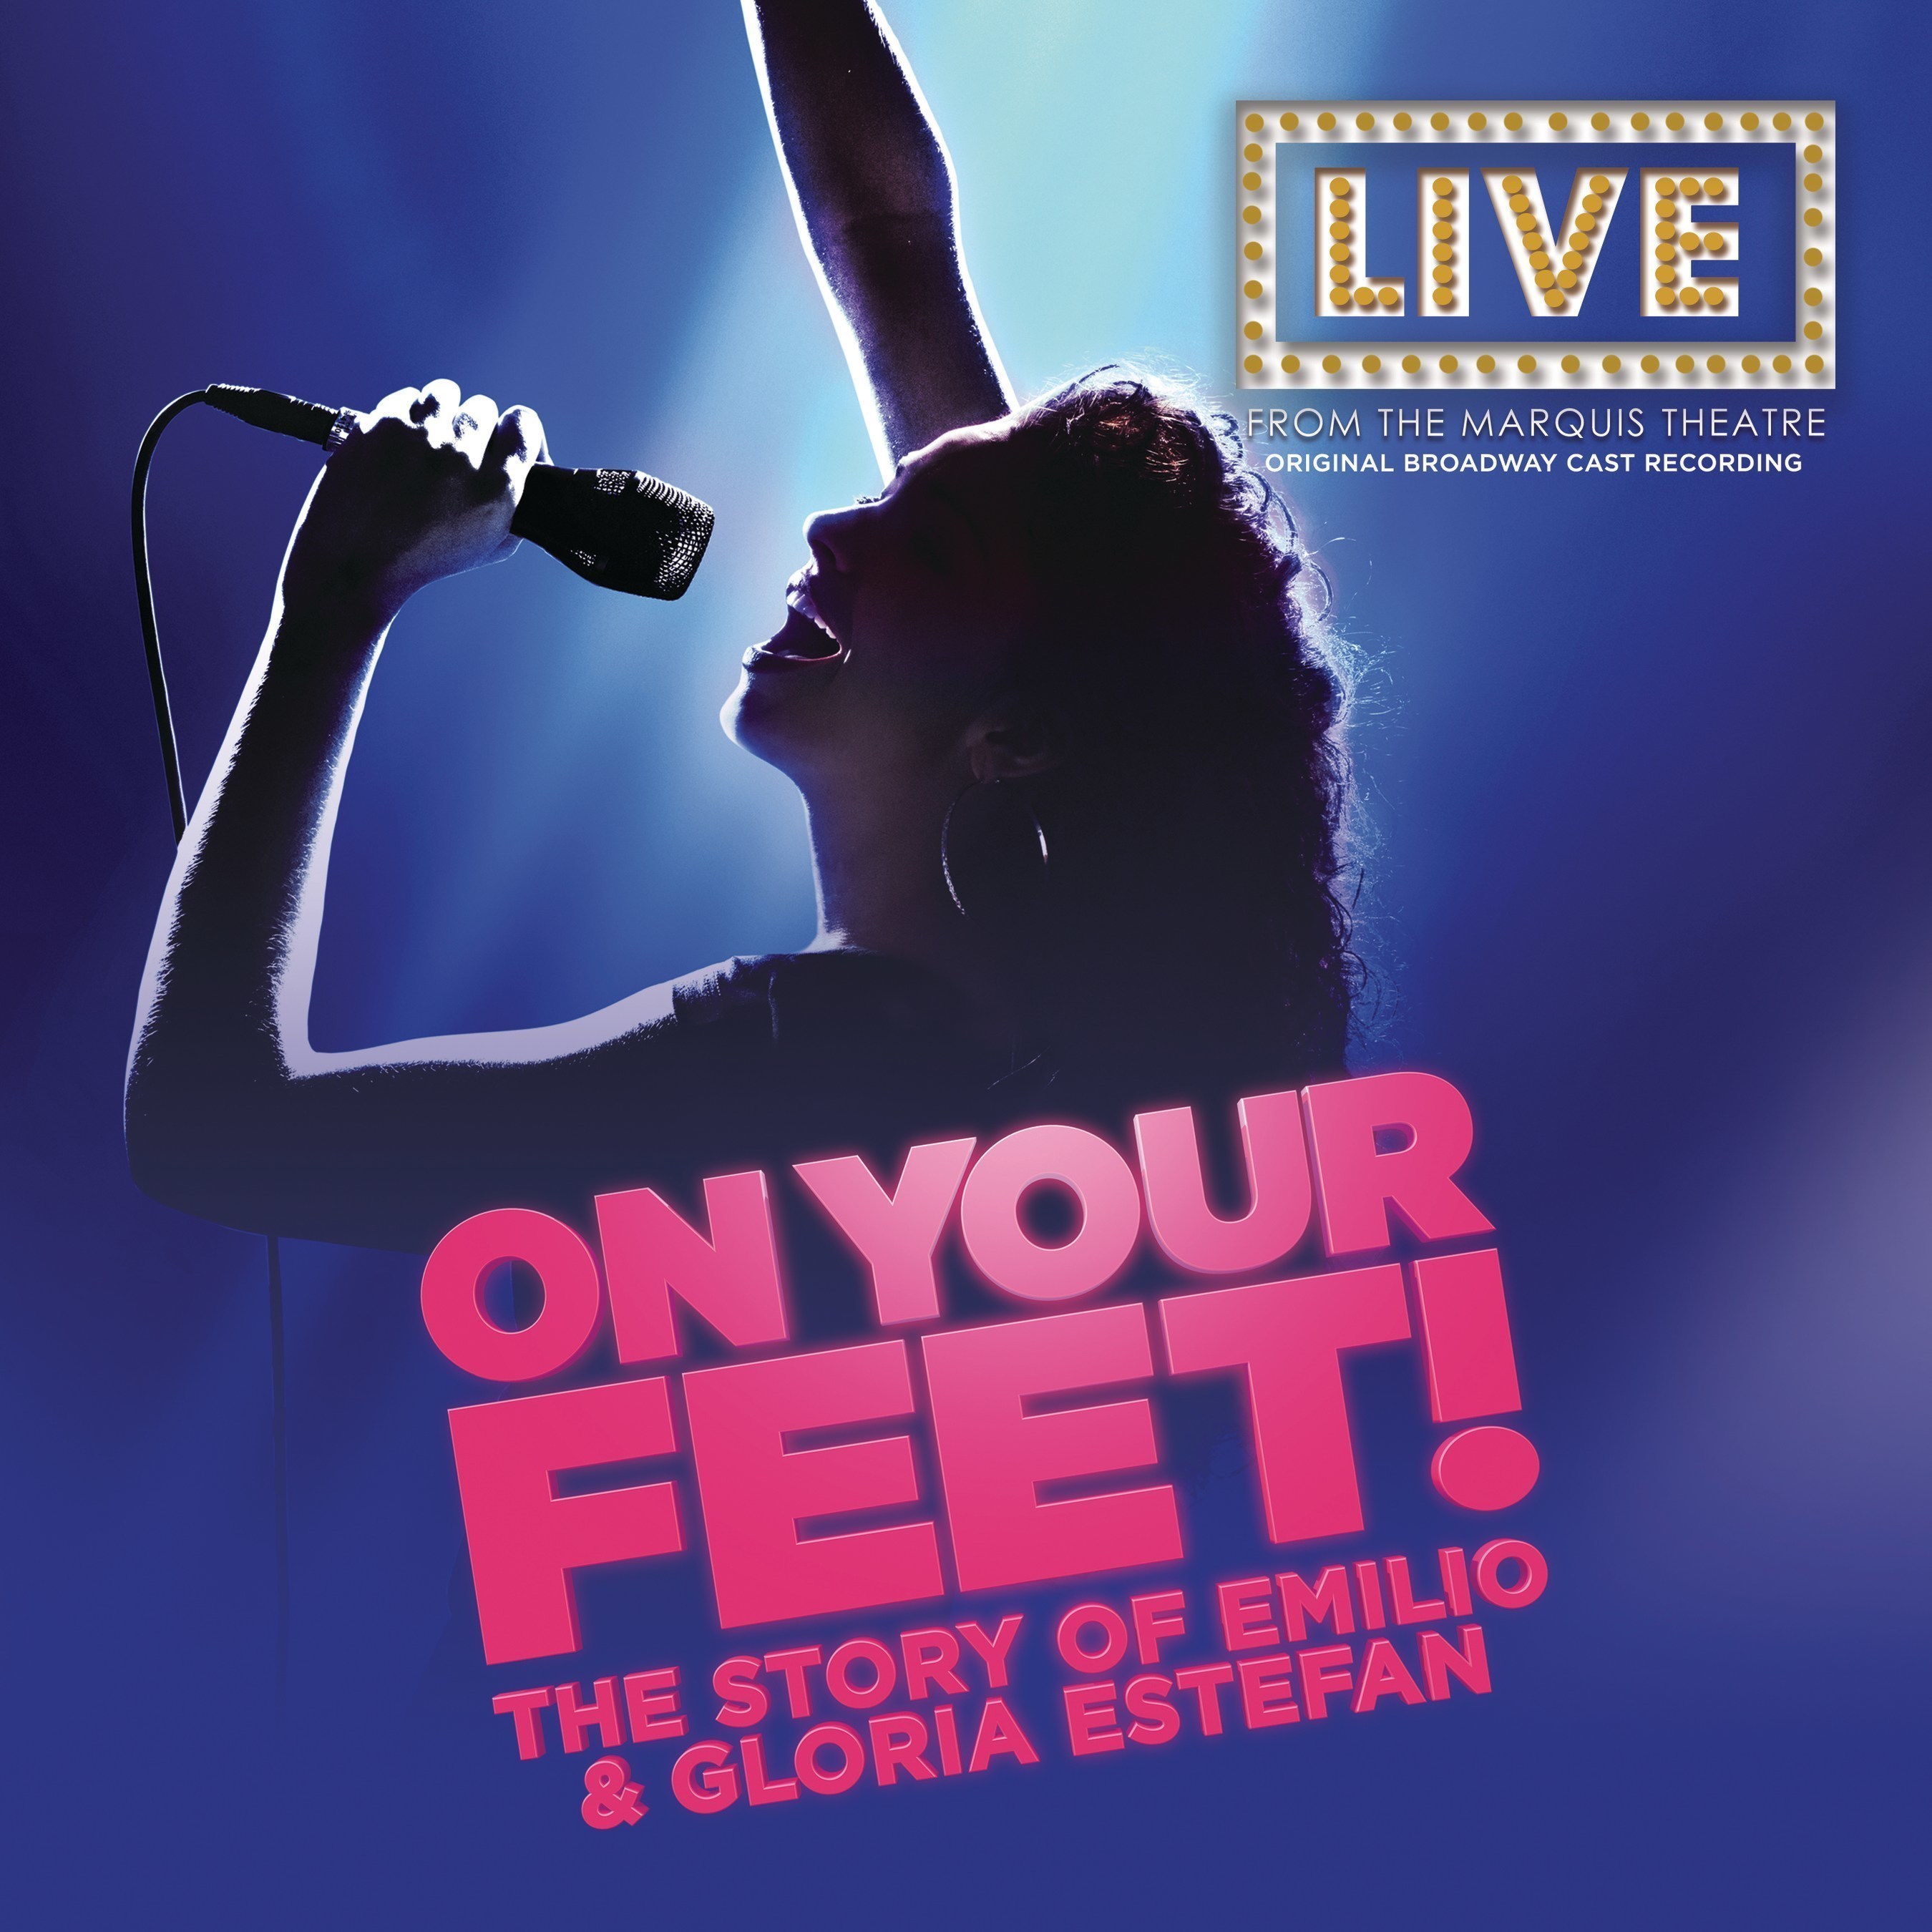 On Your Feet - Live Original Broadway Cast Recording Available April 29, 2016